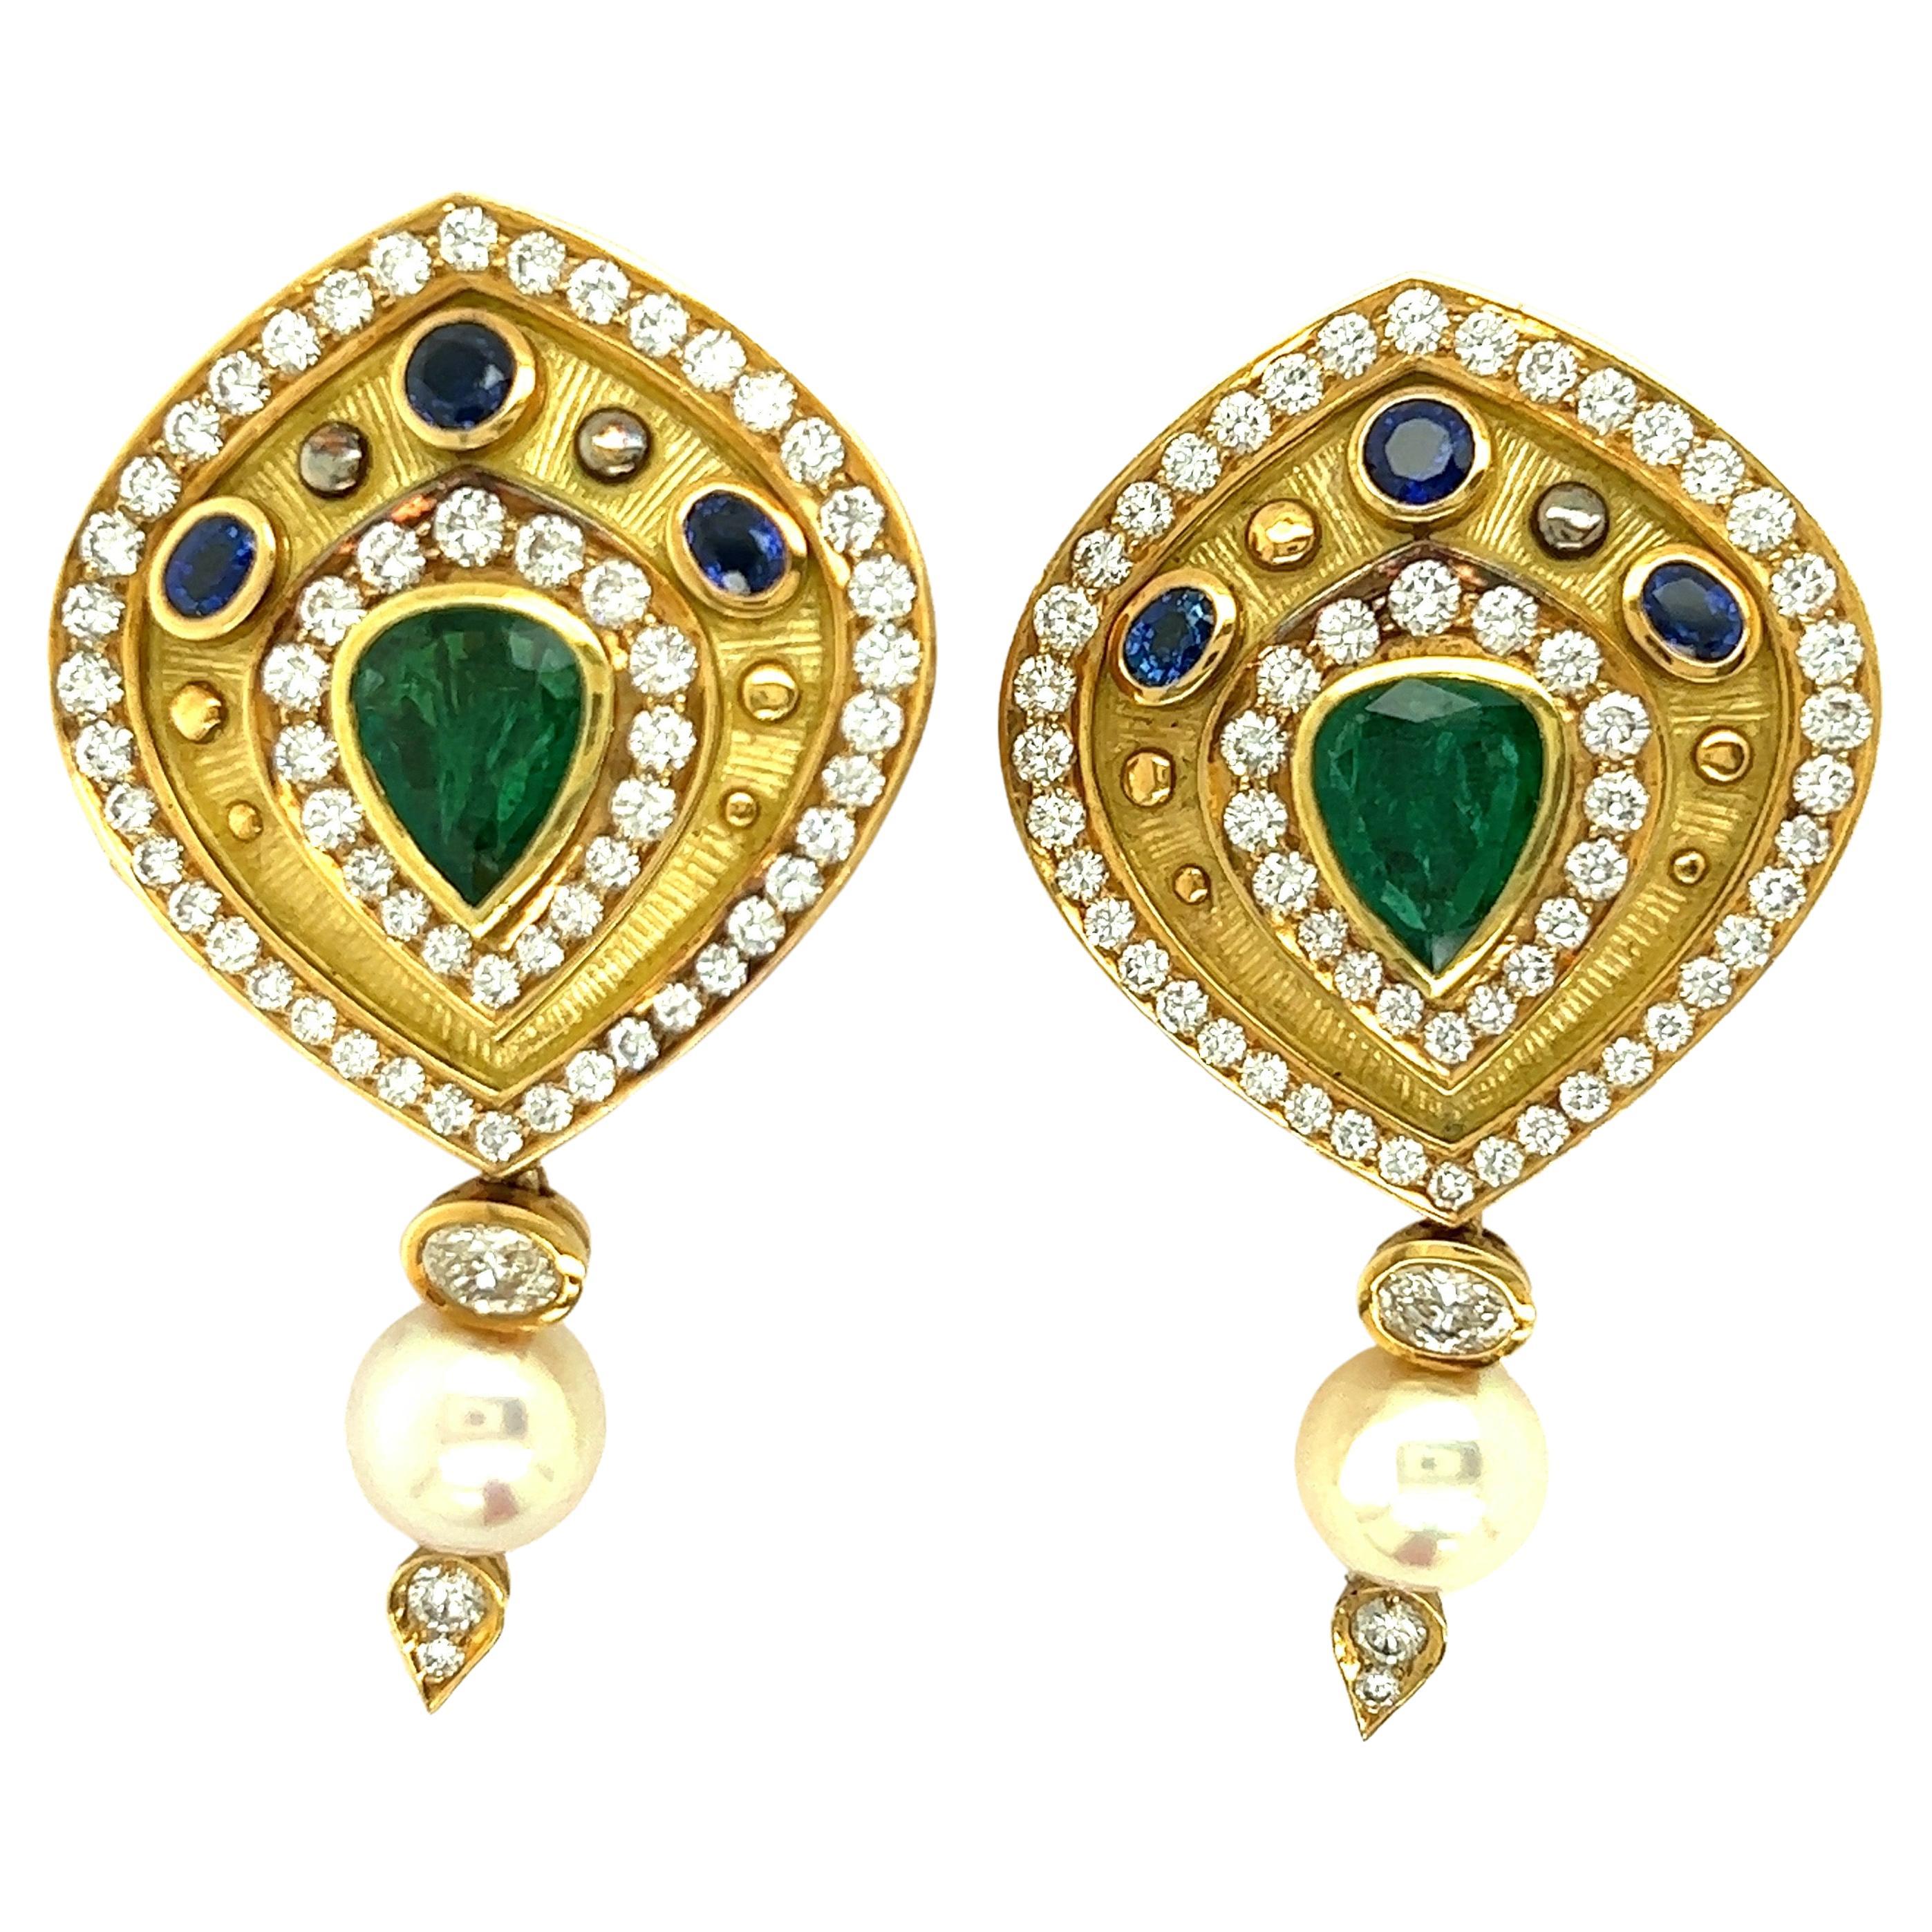 Pear Shaped Emerald, Diamond, and Sapphire 18k Yellow Gold Earrings For Sale